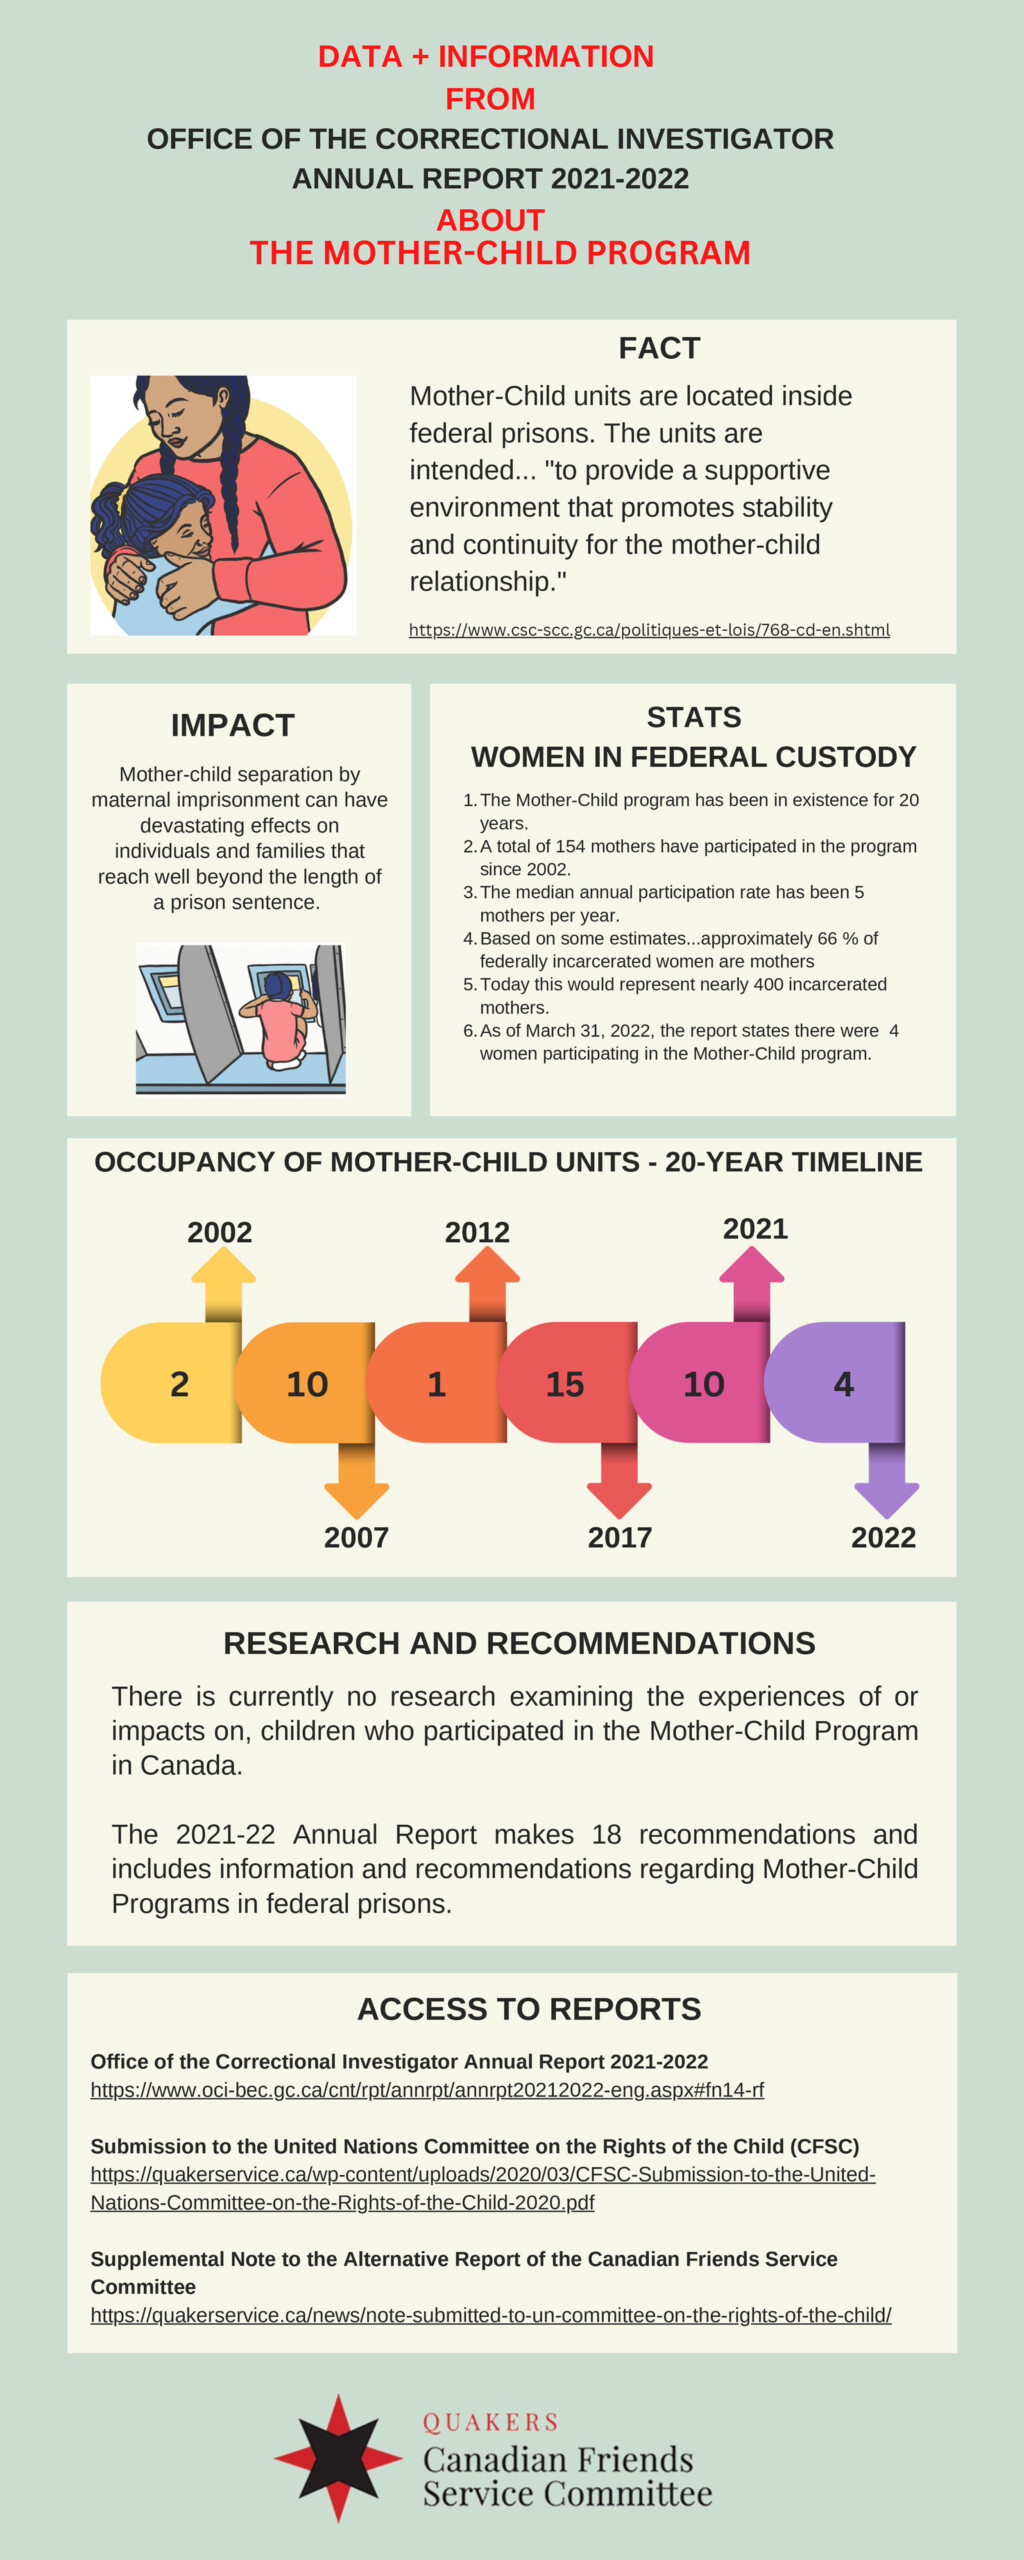 CFSC (Quakers) created this infographic about Mother-Child Units in correctional institutions, based on the 2021-2022 annual report of the Office of the Correctional Investigator of Canada